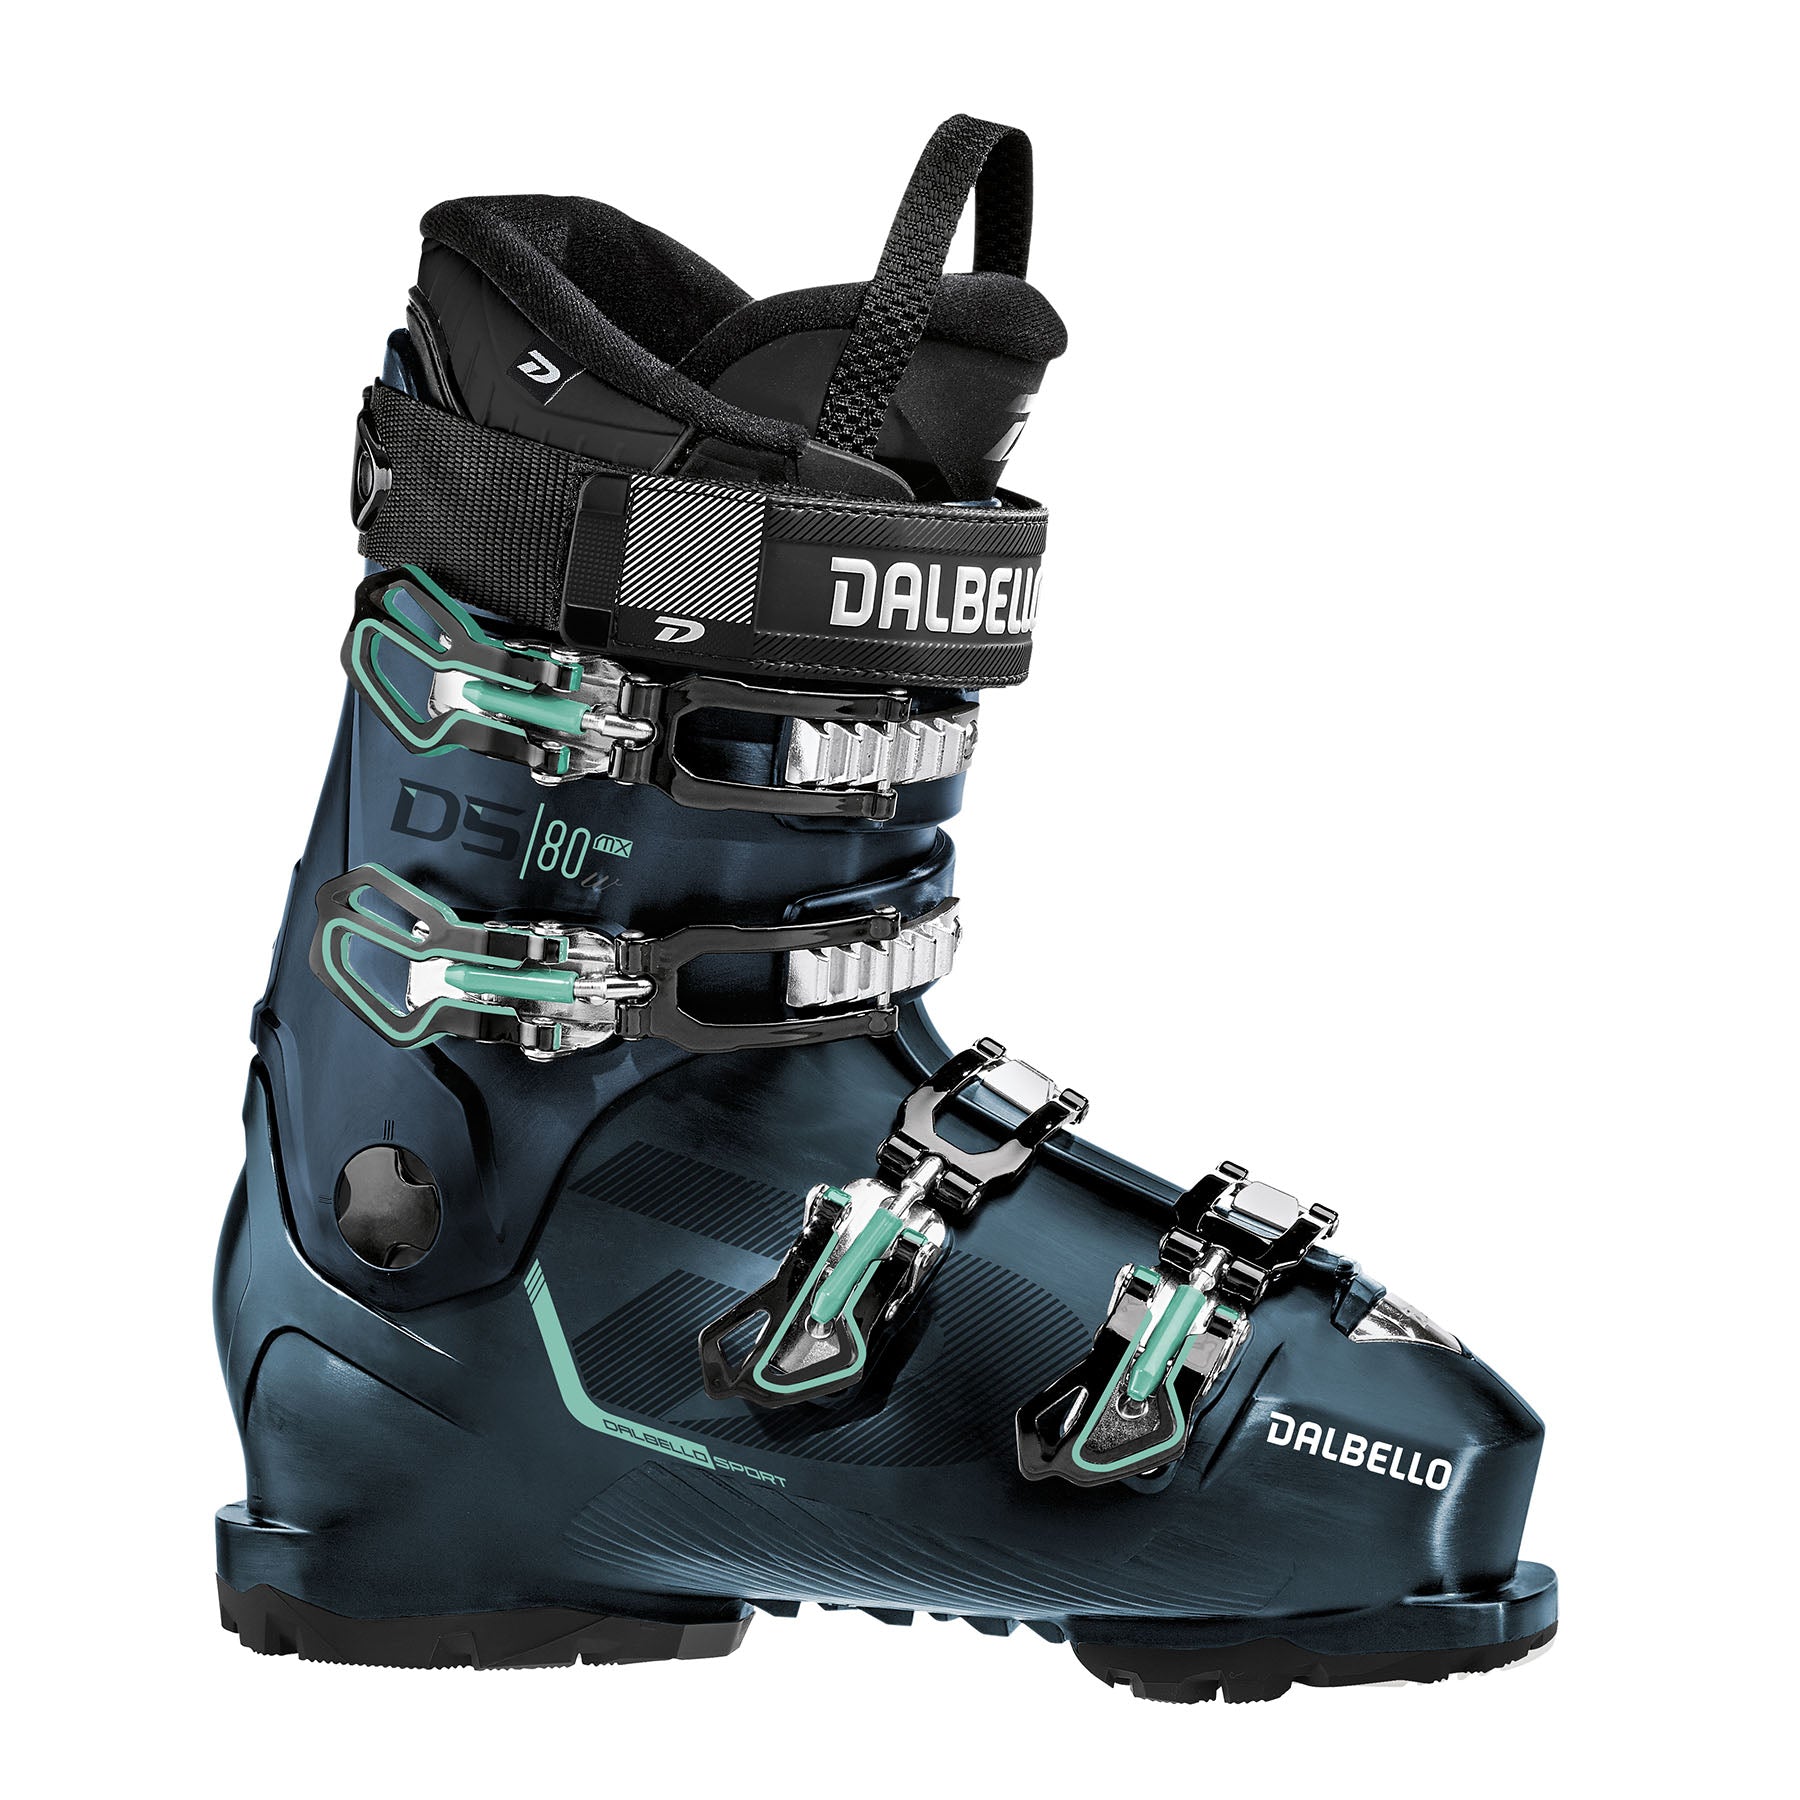 Hero image featuring the Women's Dalbello DS MX 80 ski boot in opal blue with silver and teal buckles and black trim.